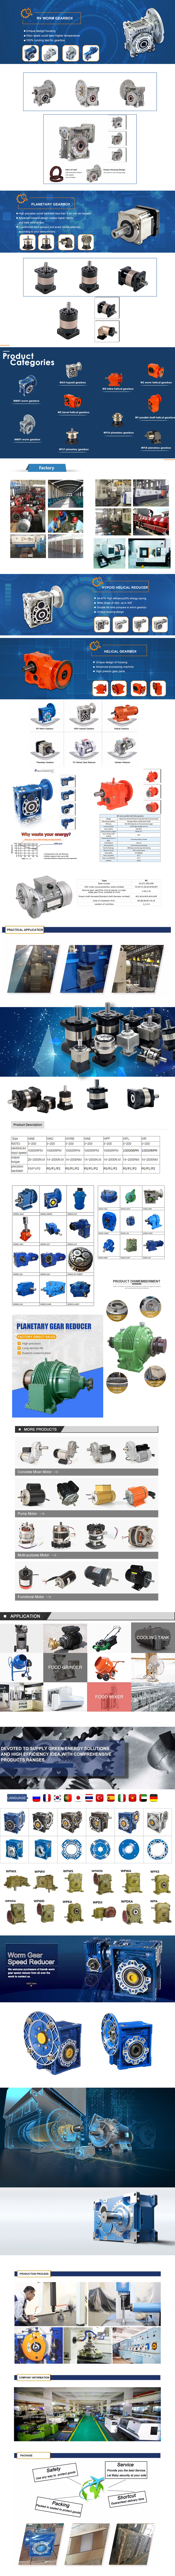   in Raurkela India  sales   price   shop   near me   near me shop   factory   supplier Aluminum Combined Worm Gear Reducer for Ceramic Machinery manufacturer   best   Cost   Custom   Cheap   wholesaler 